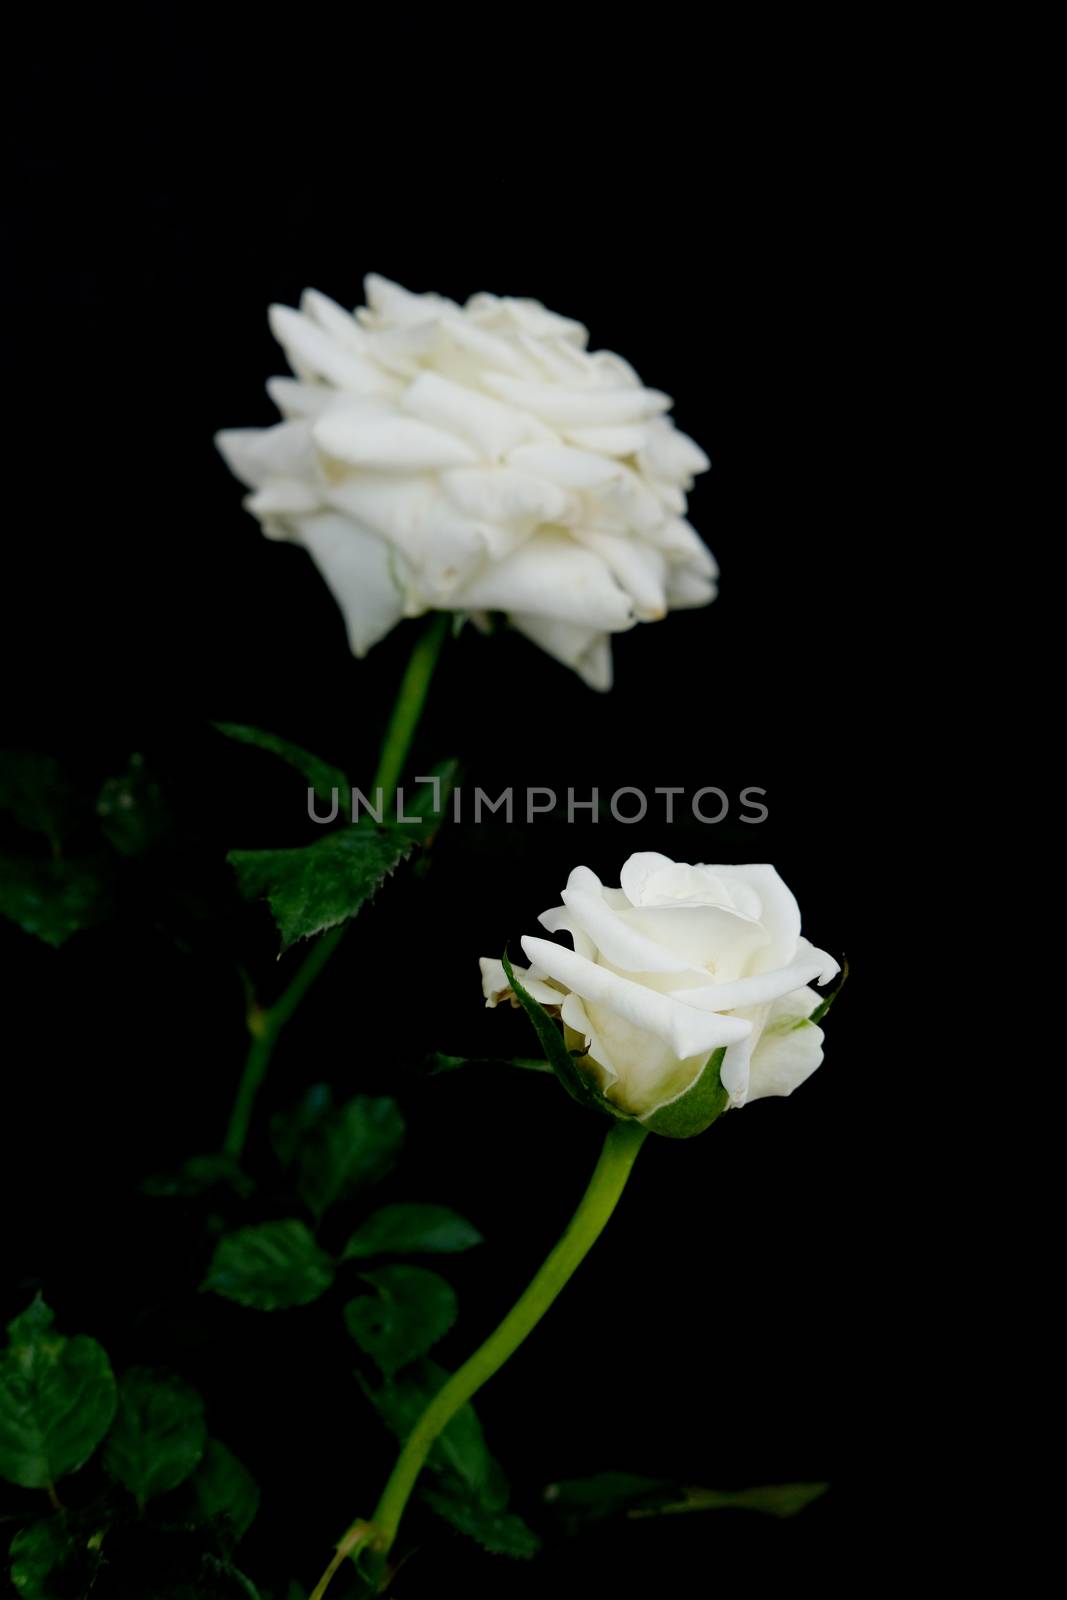 white rose flower with stem and leaves isolated on black background. Image photo